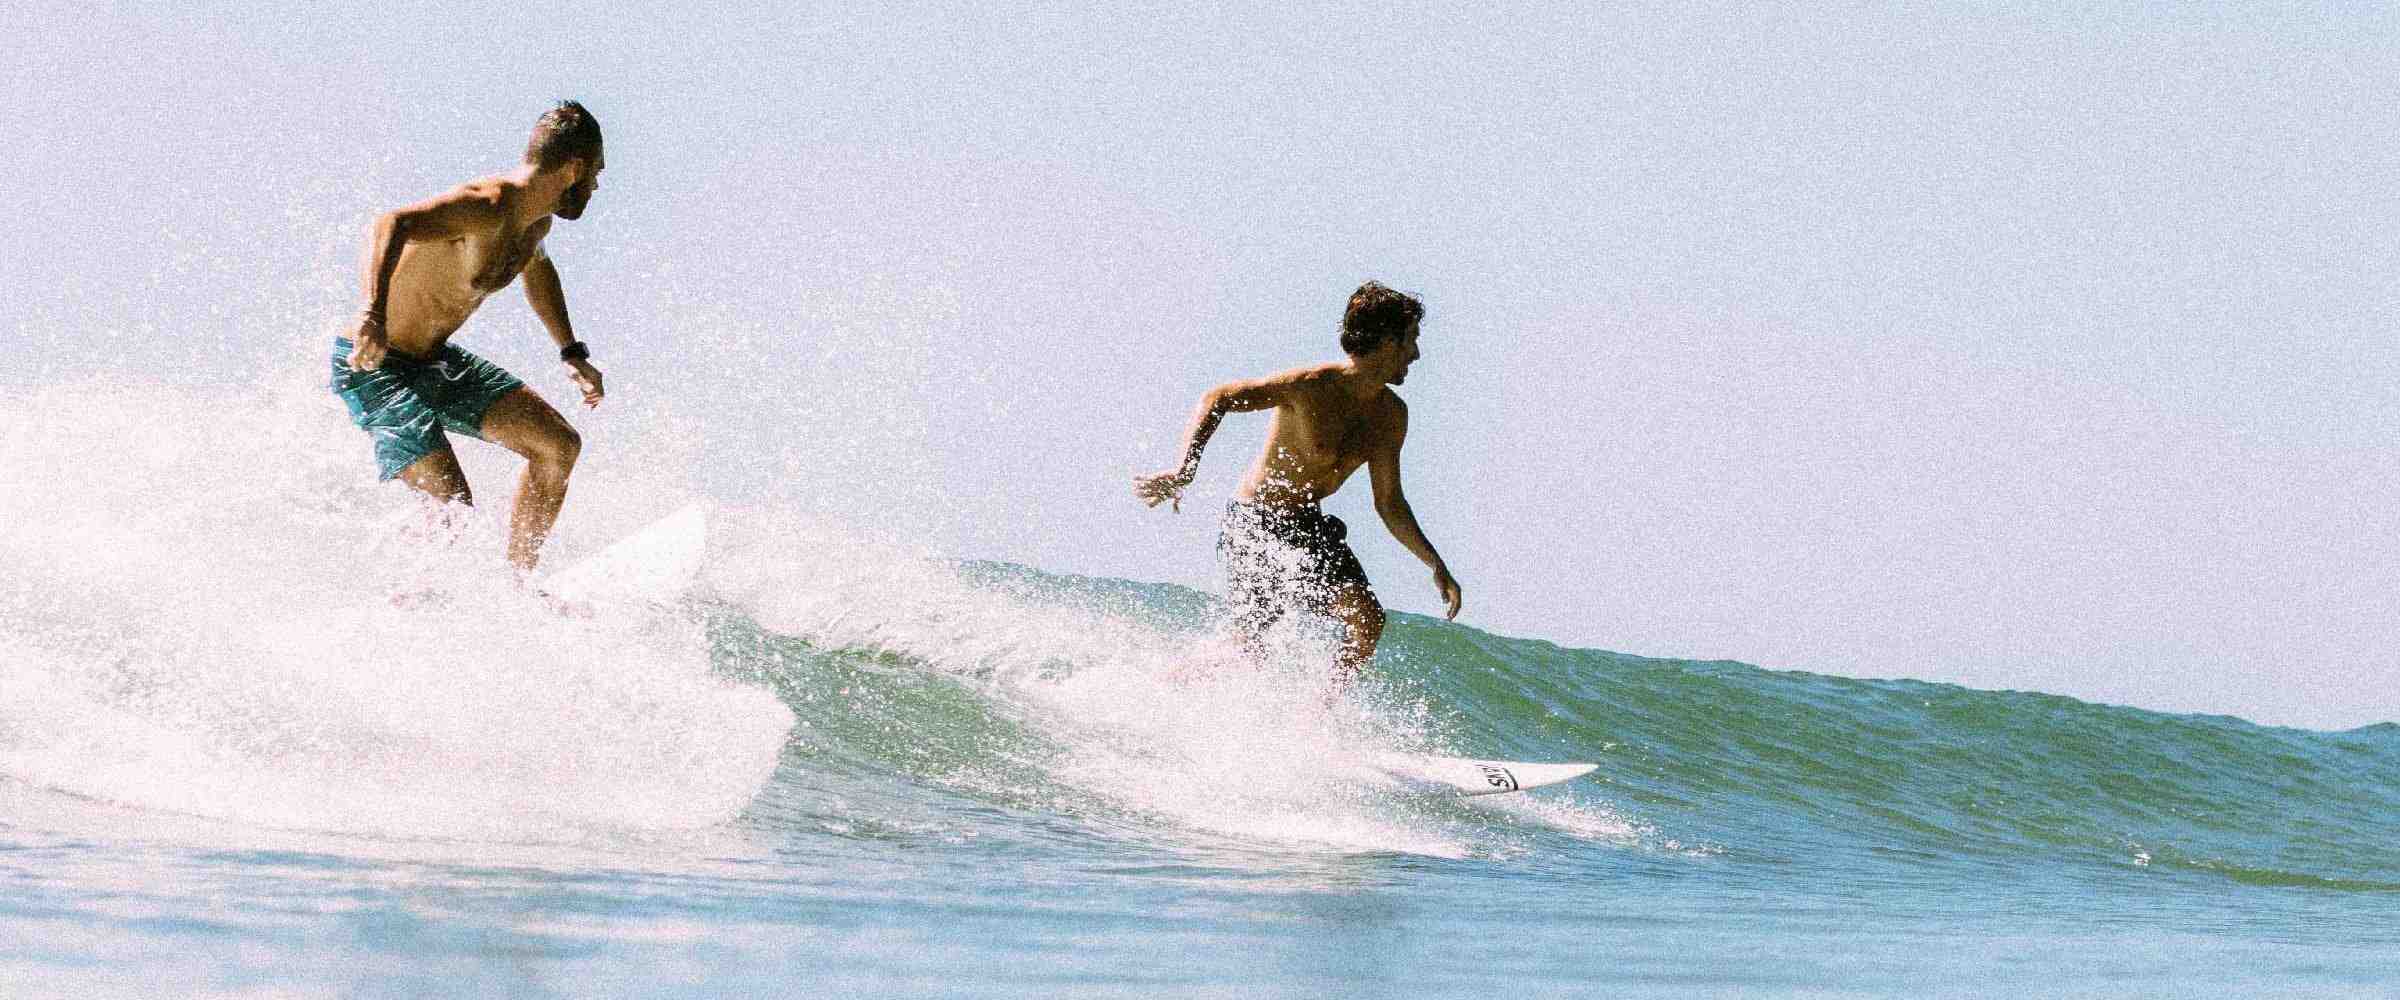 Where are the biggest waves for surfing?